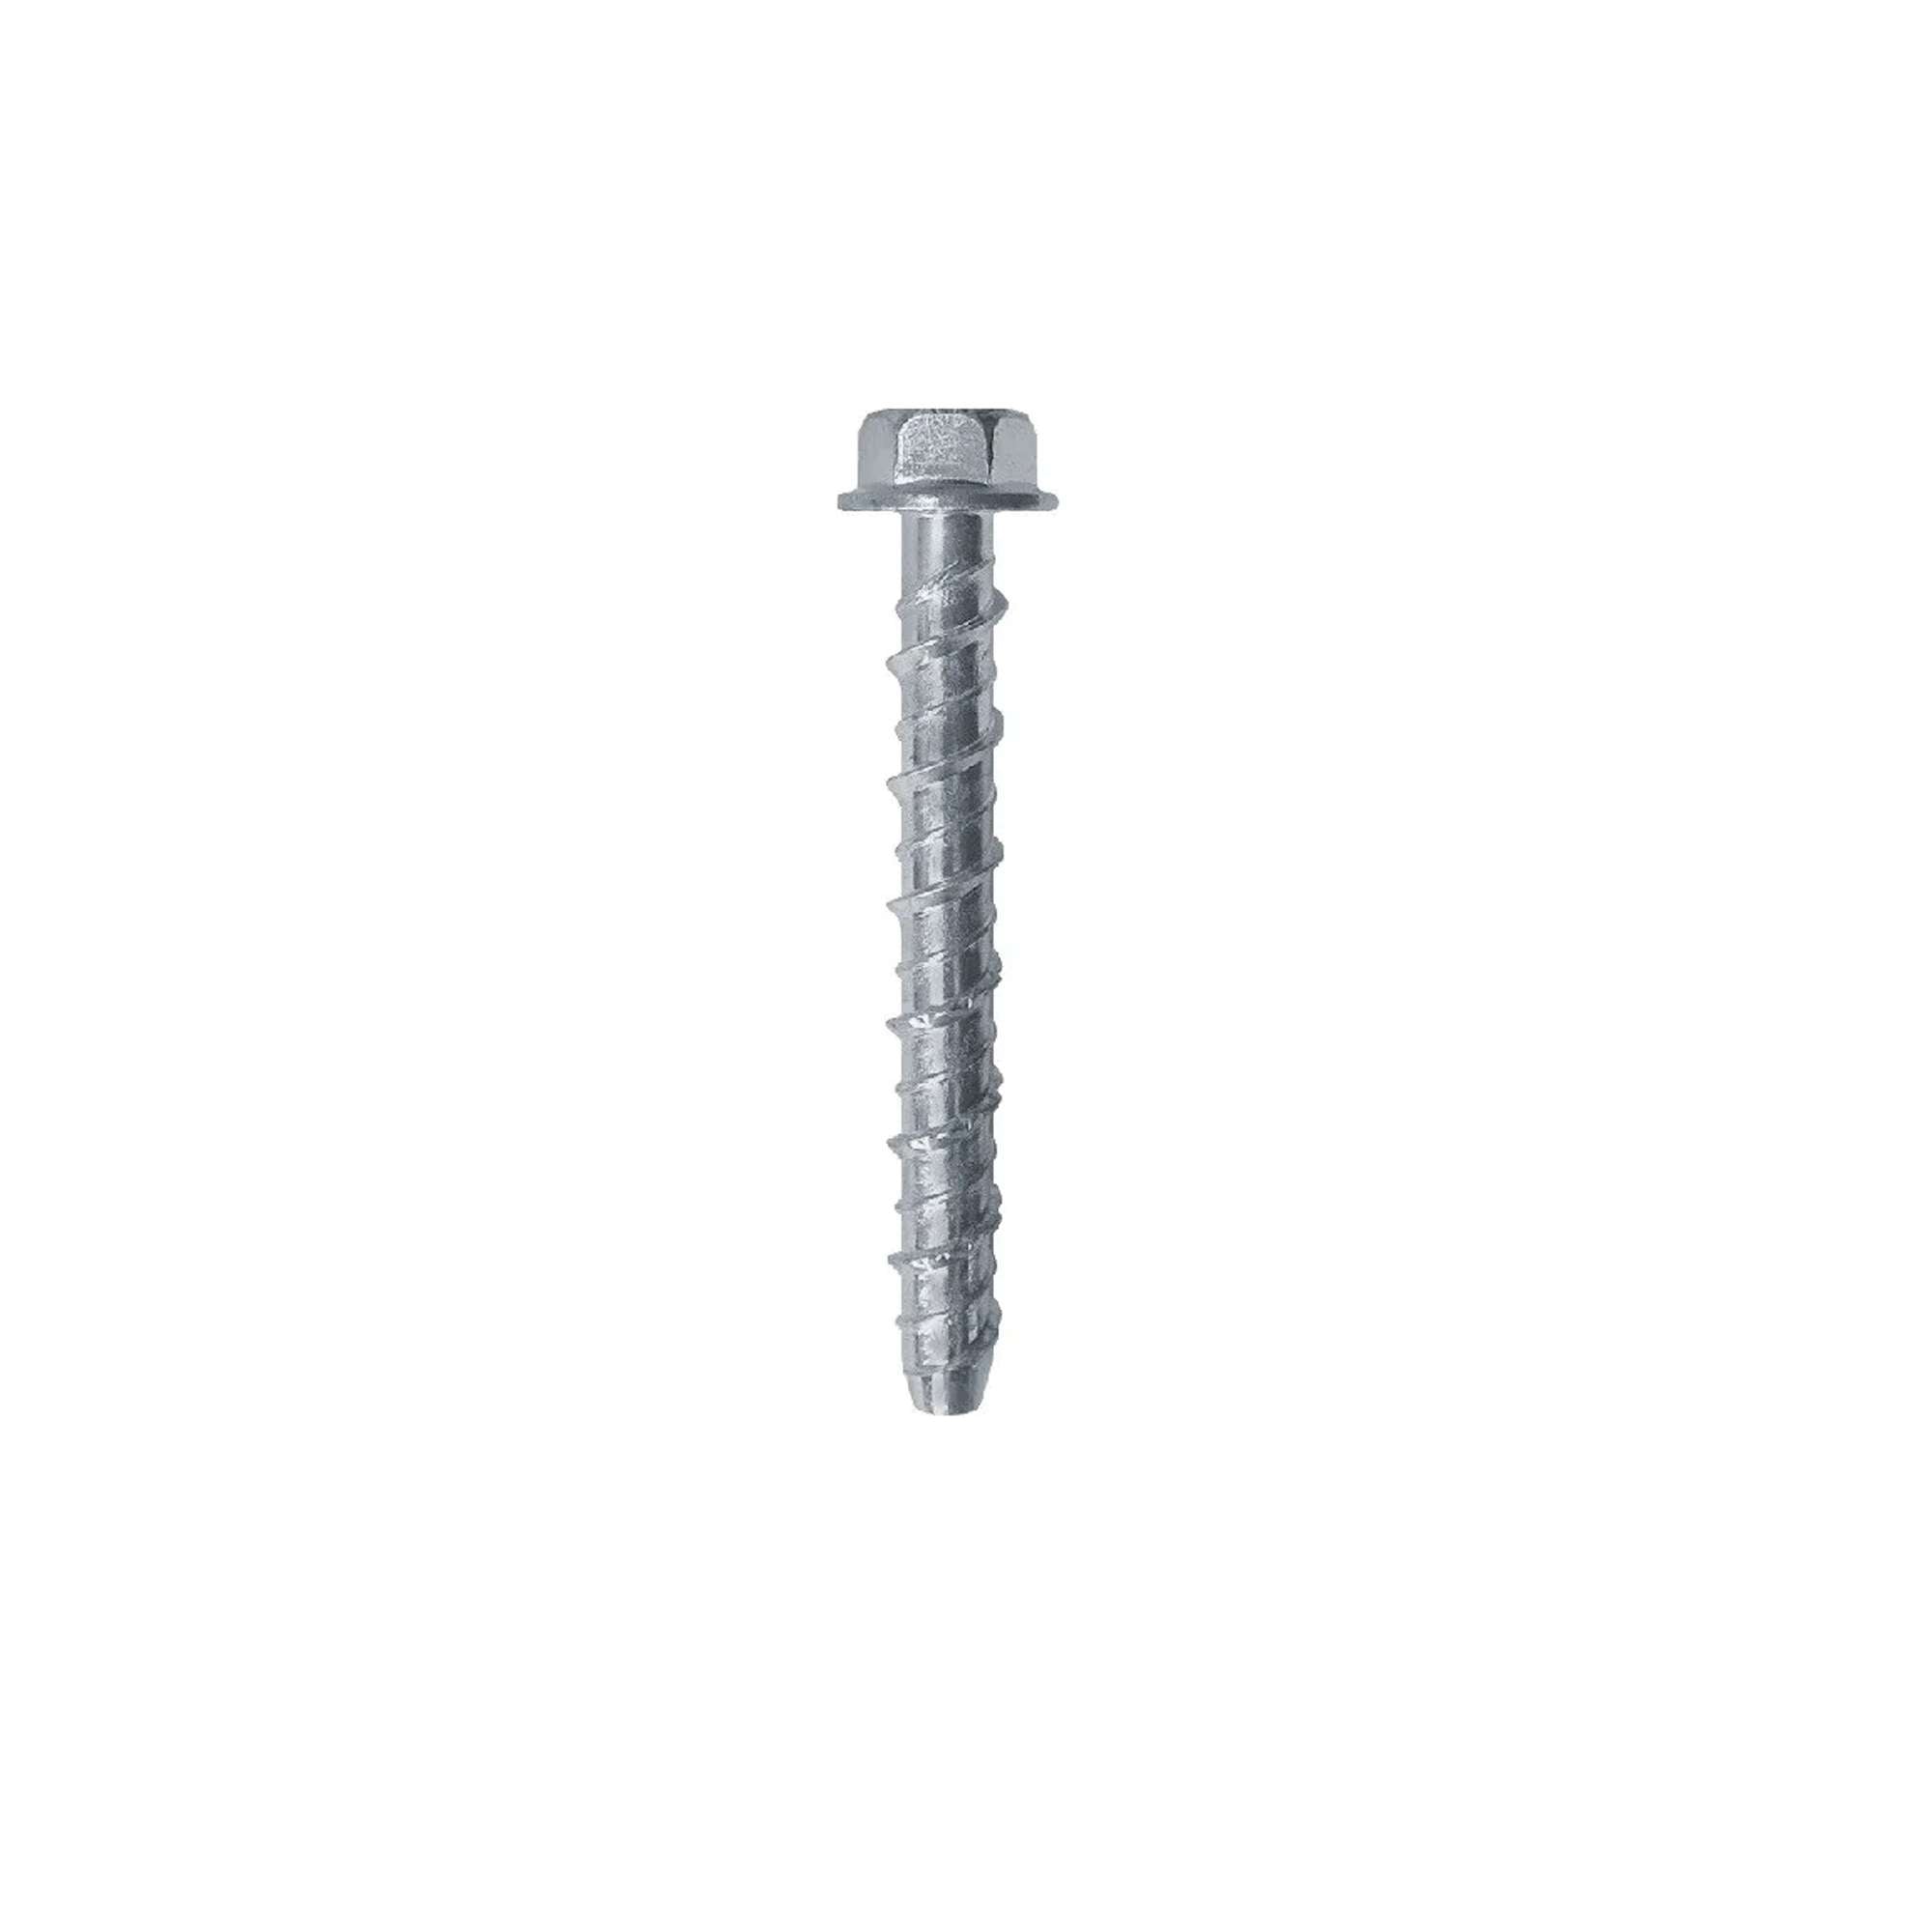 Concrete screw for structural fasteners 10x75mm - 100pcs. - 72005b10075 Friulsider